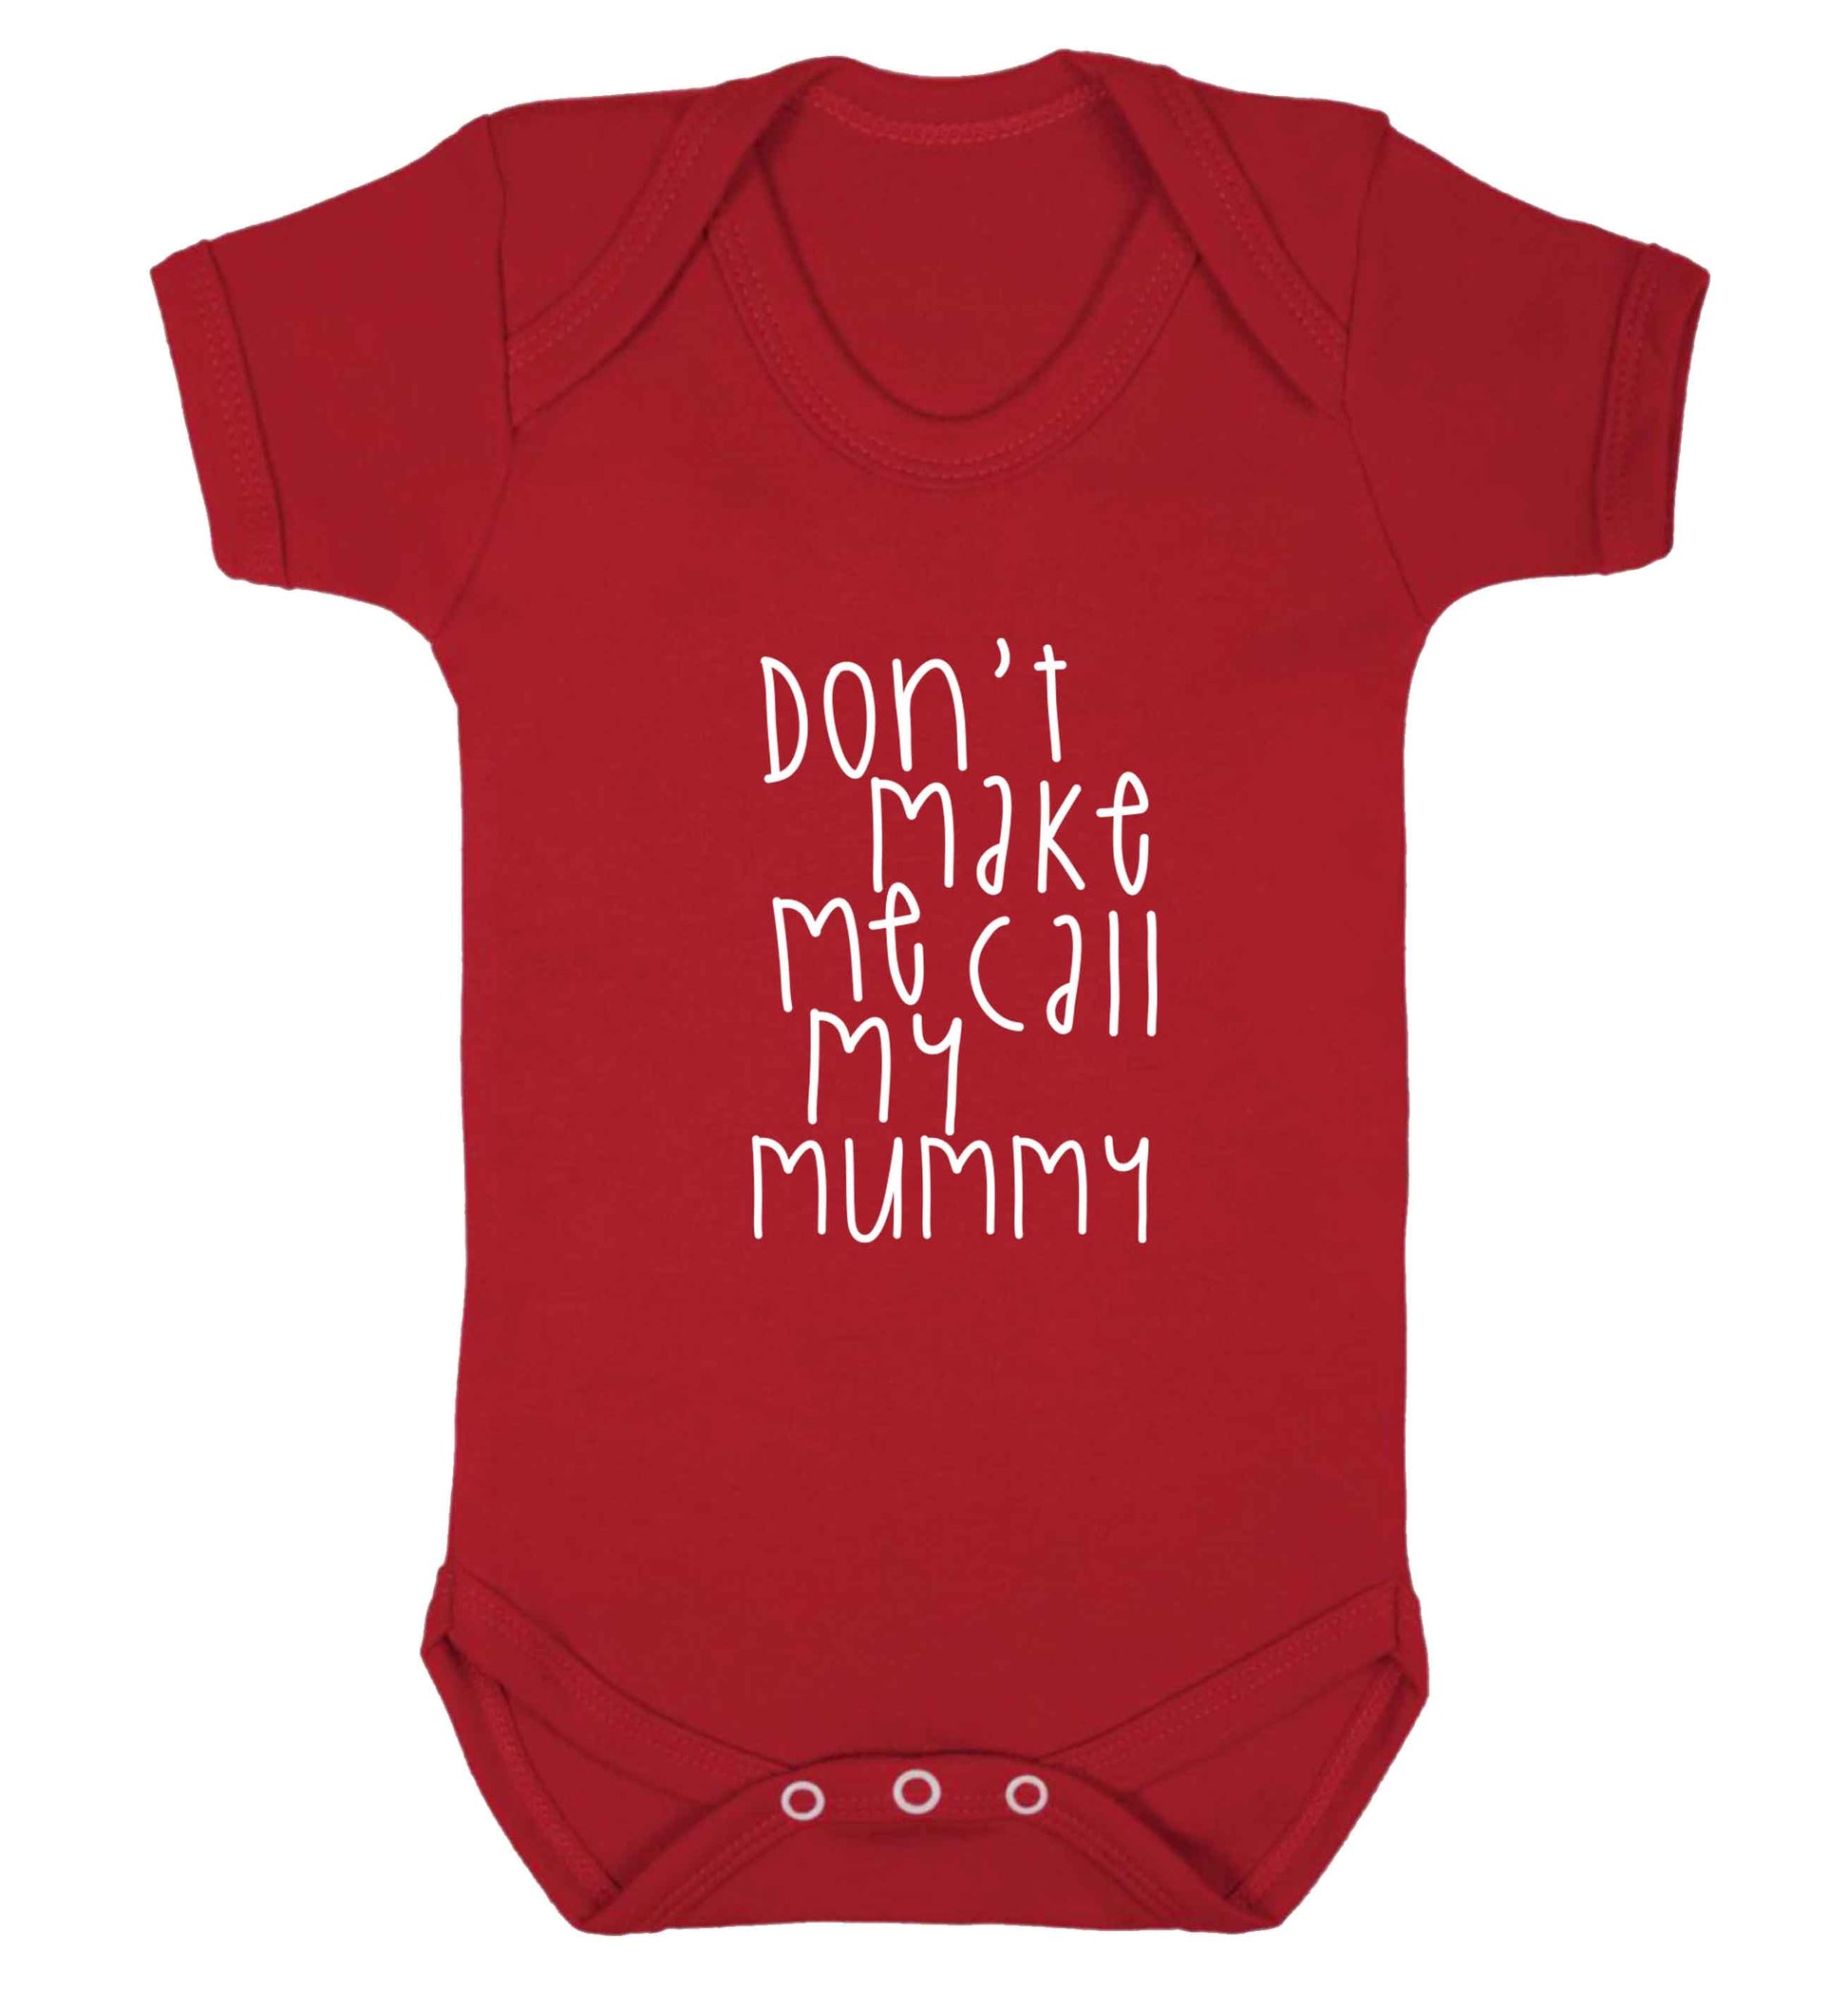 Don't make me call my mummy baby vest red 18-24 months